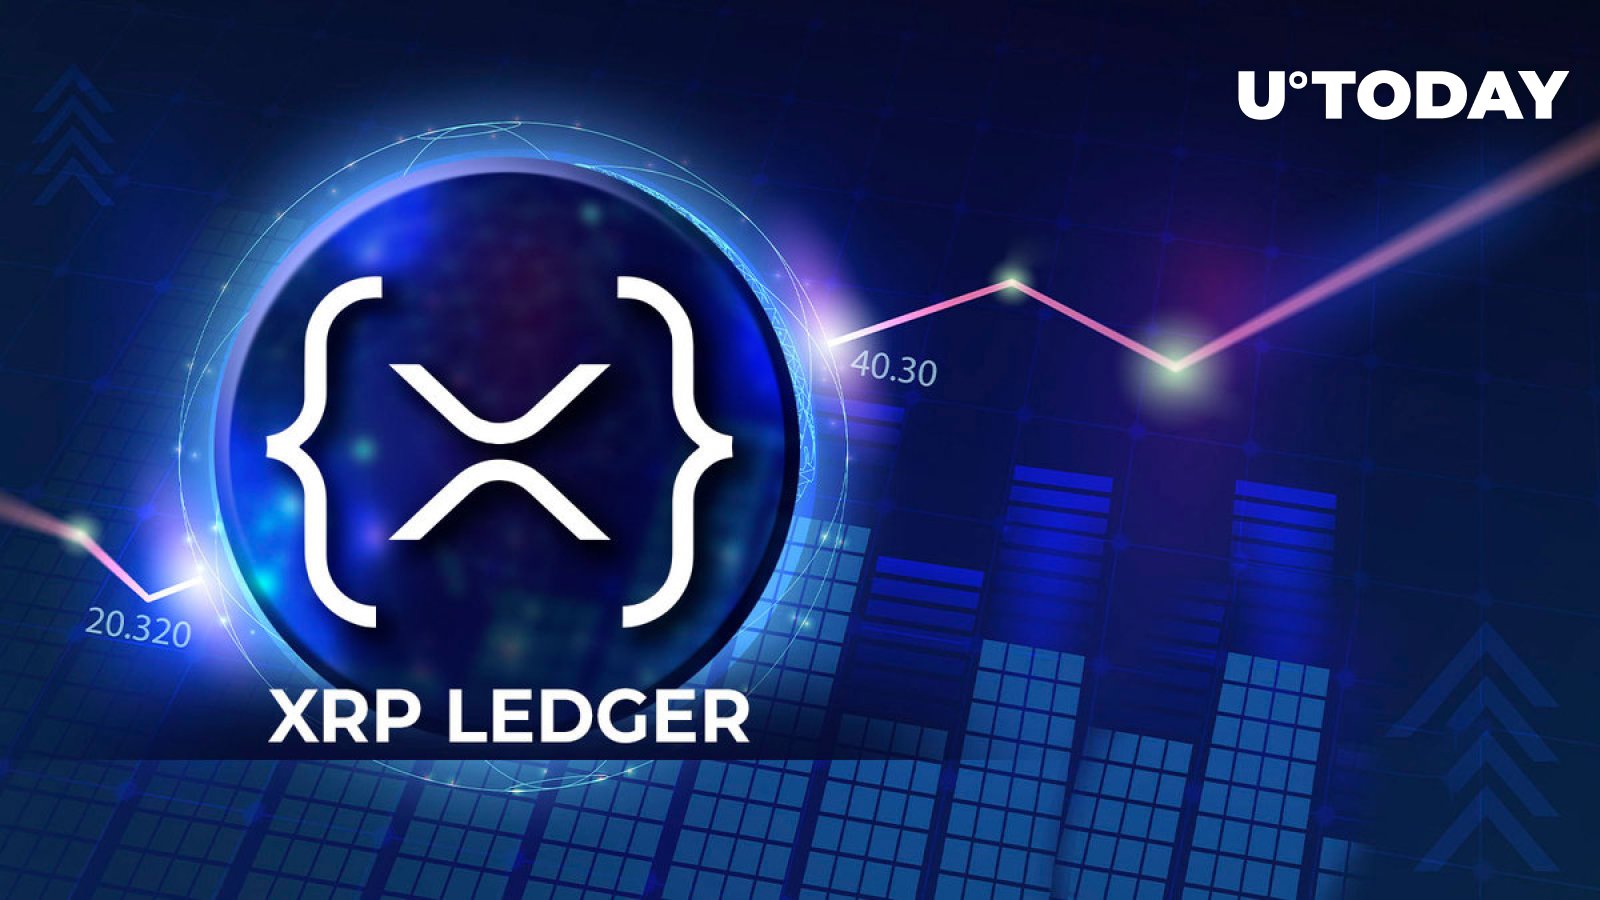 XRP Ledger Surges 400% as On-chain Activity Grew in Q4: Details